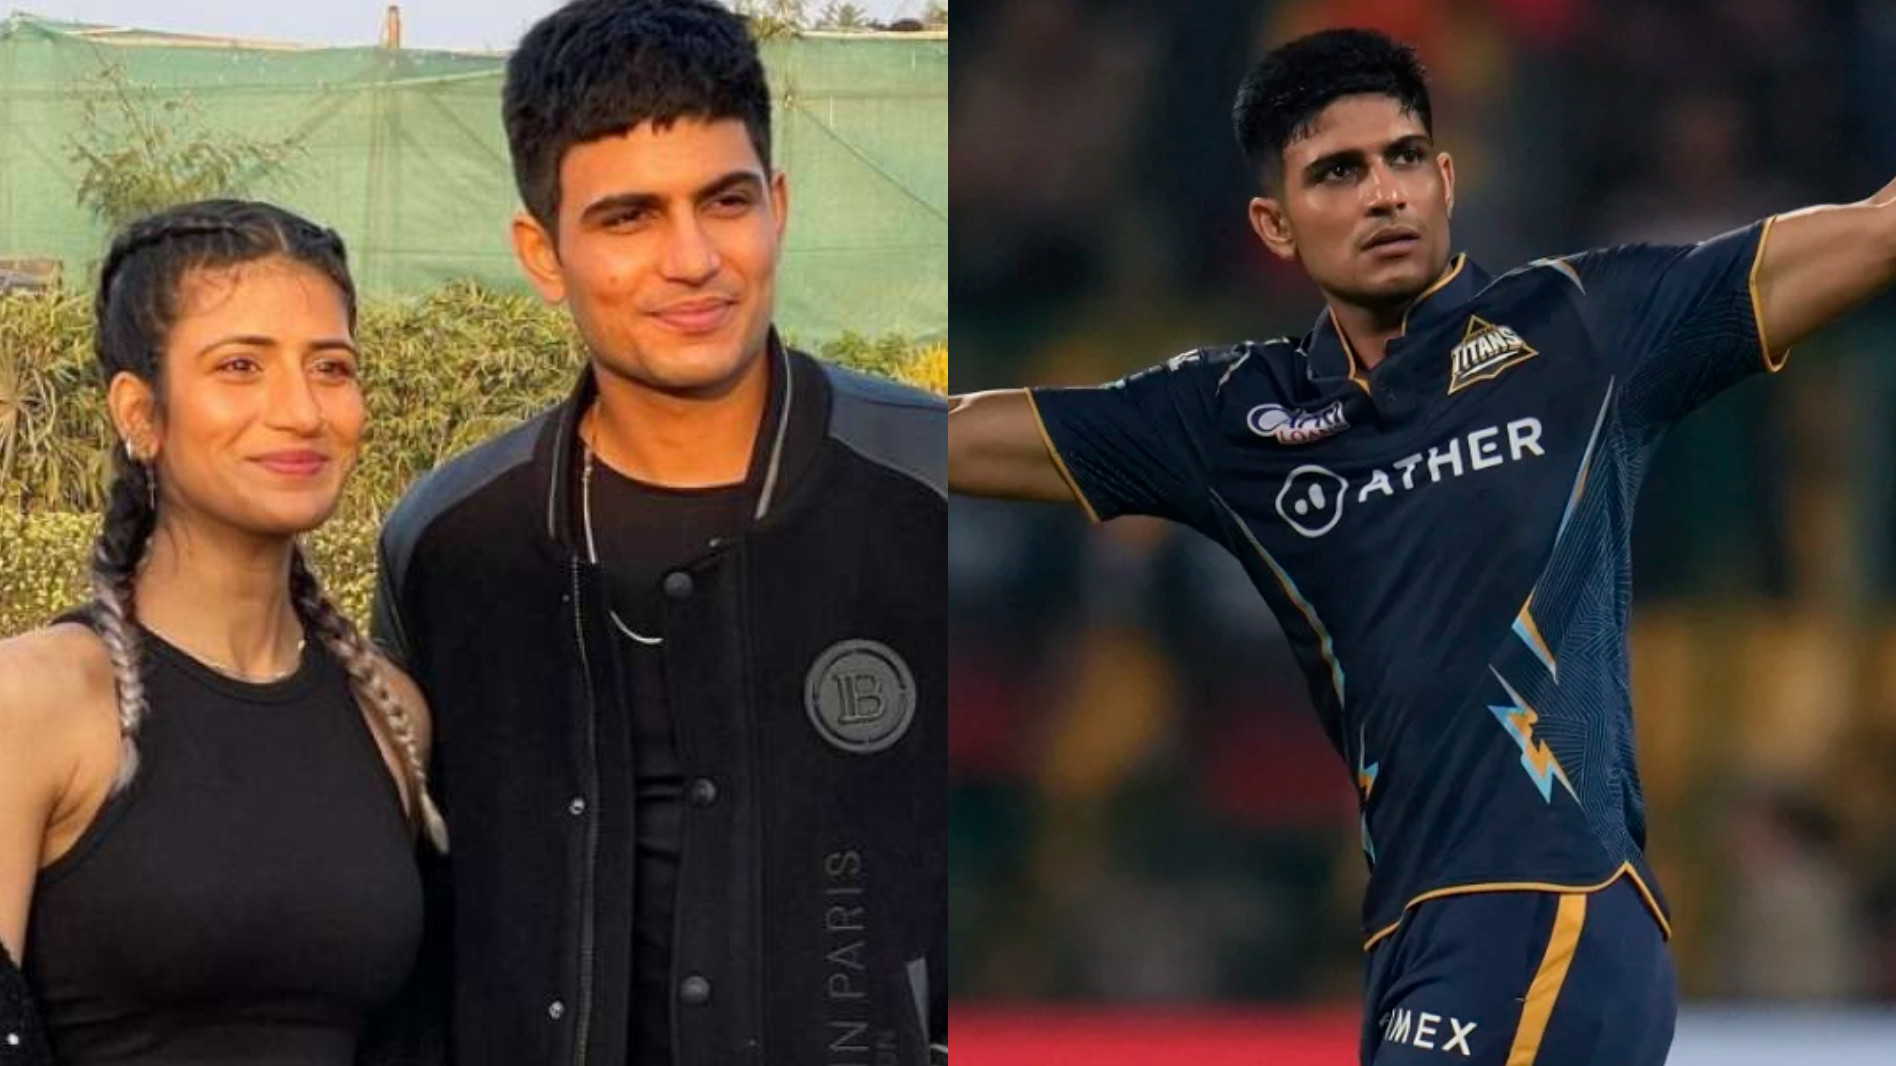 IPL 2023: Fans react to Shubman Gill’s sister Shahneel getting abuse on social media after GT knocked RCB out